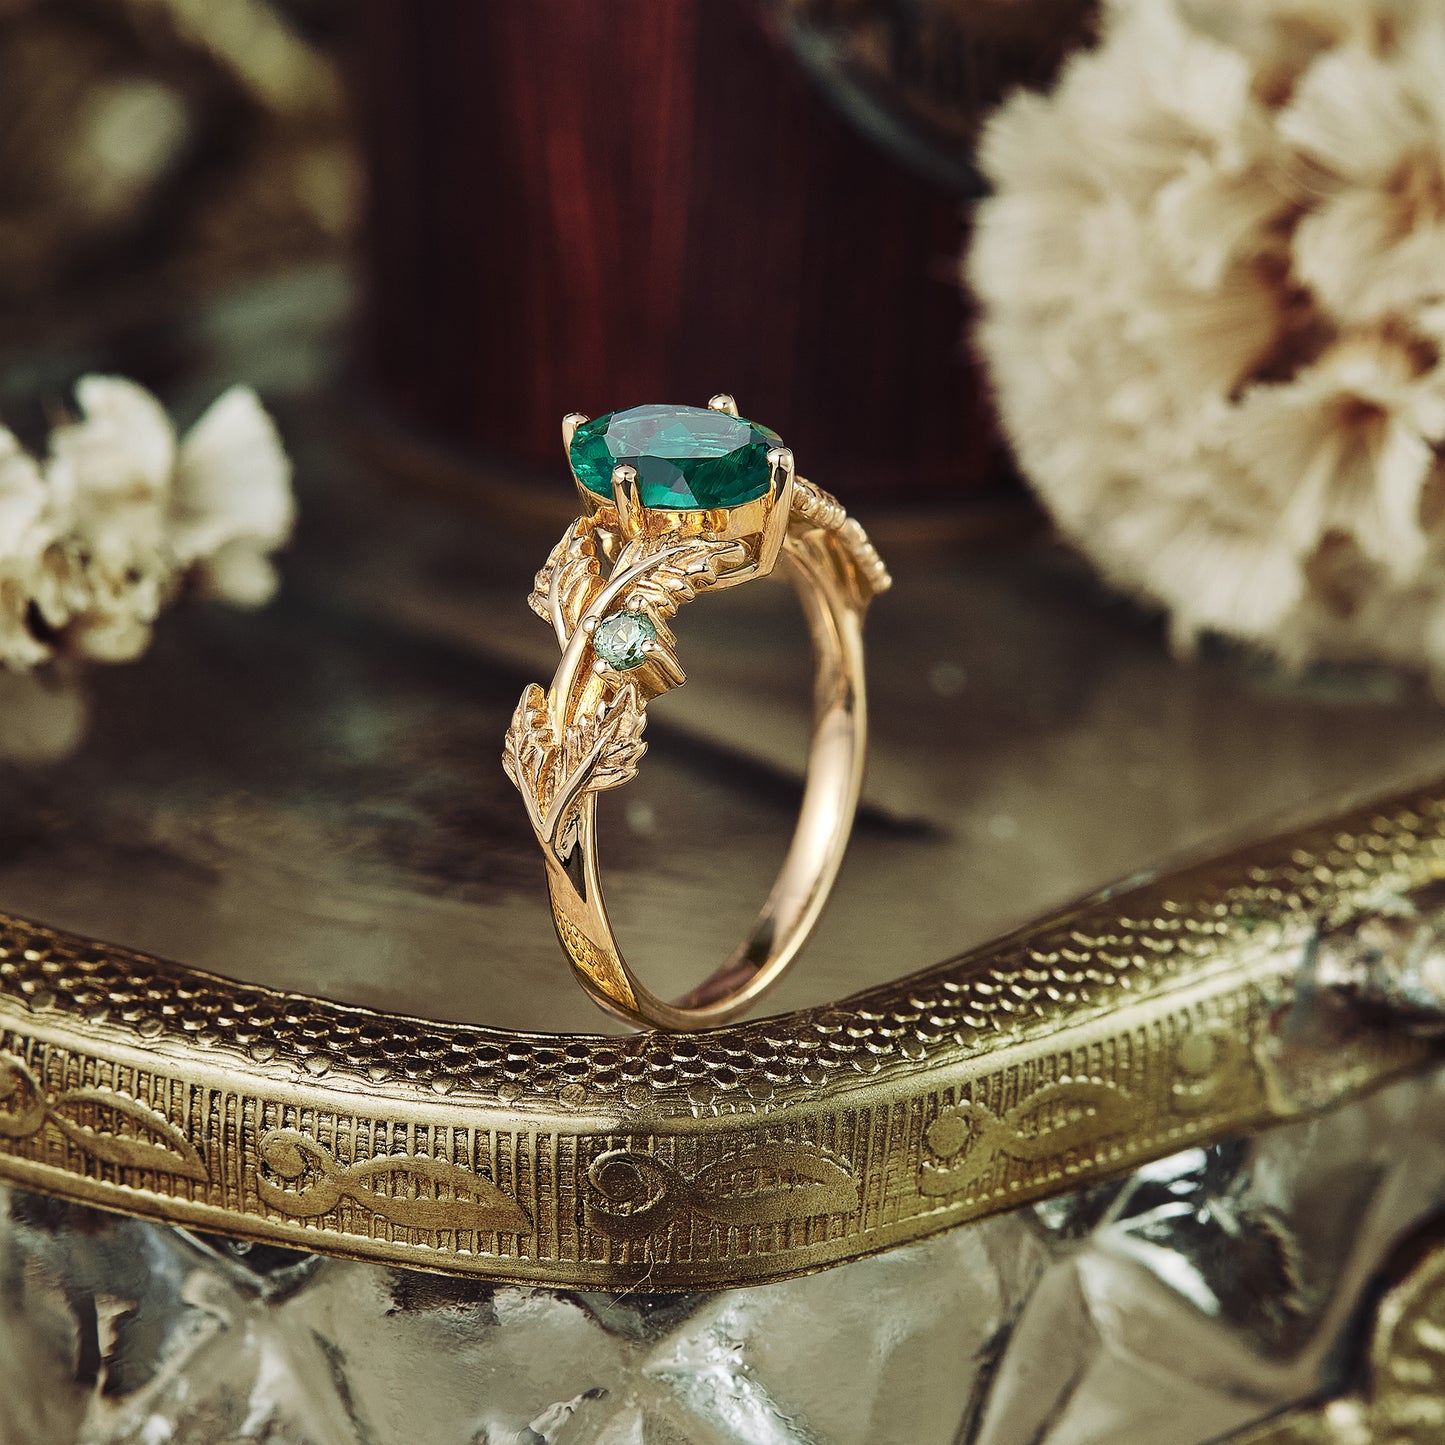 Emerald Engagement Ring with Diamonds | Buy ➦ $960.00 on One2Three Jewelry